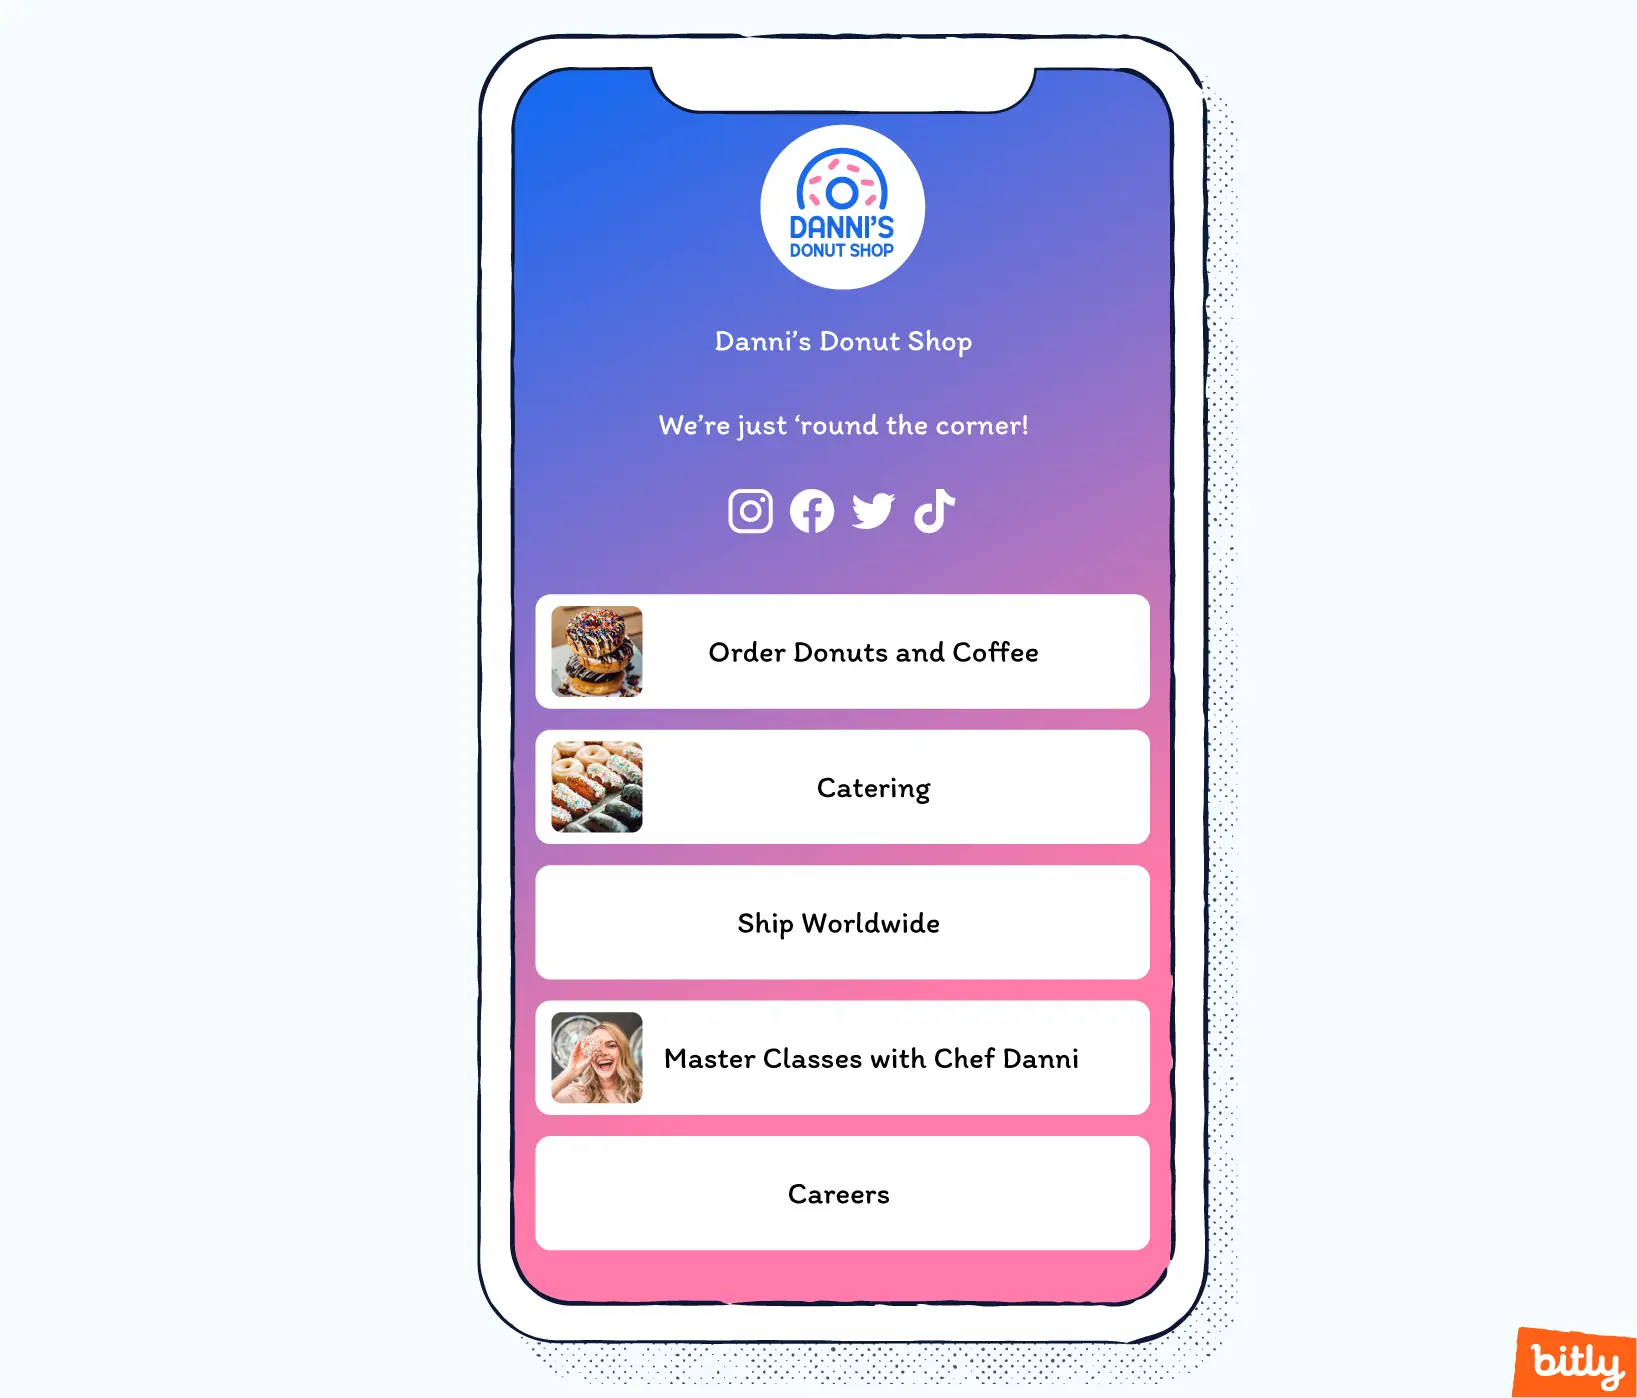 An example of a microsite displayed on a smartphone for Danni's Donut Shop.